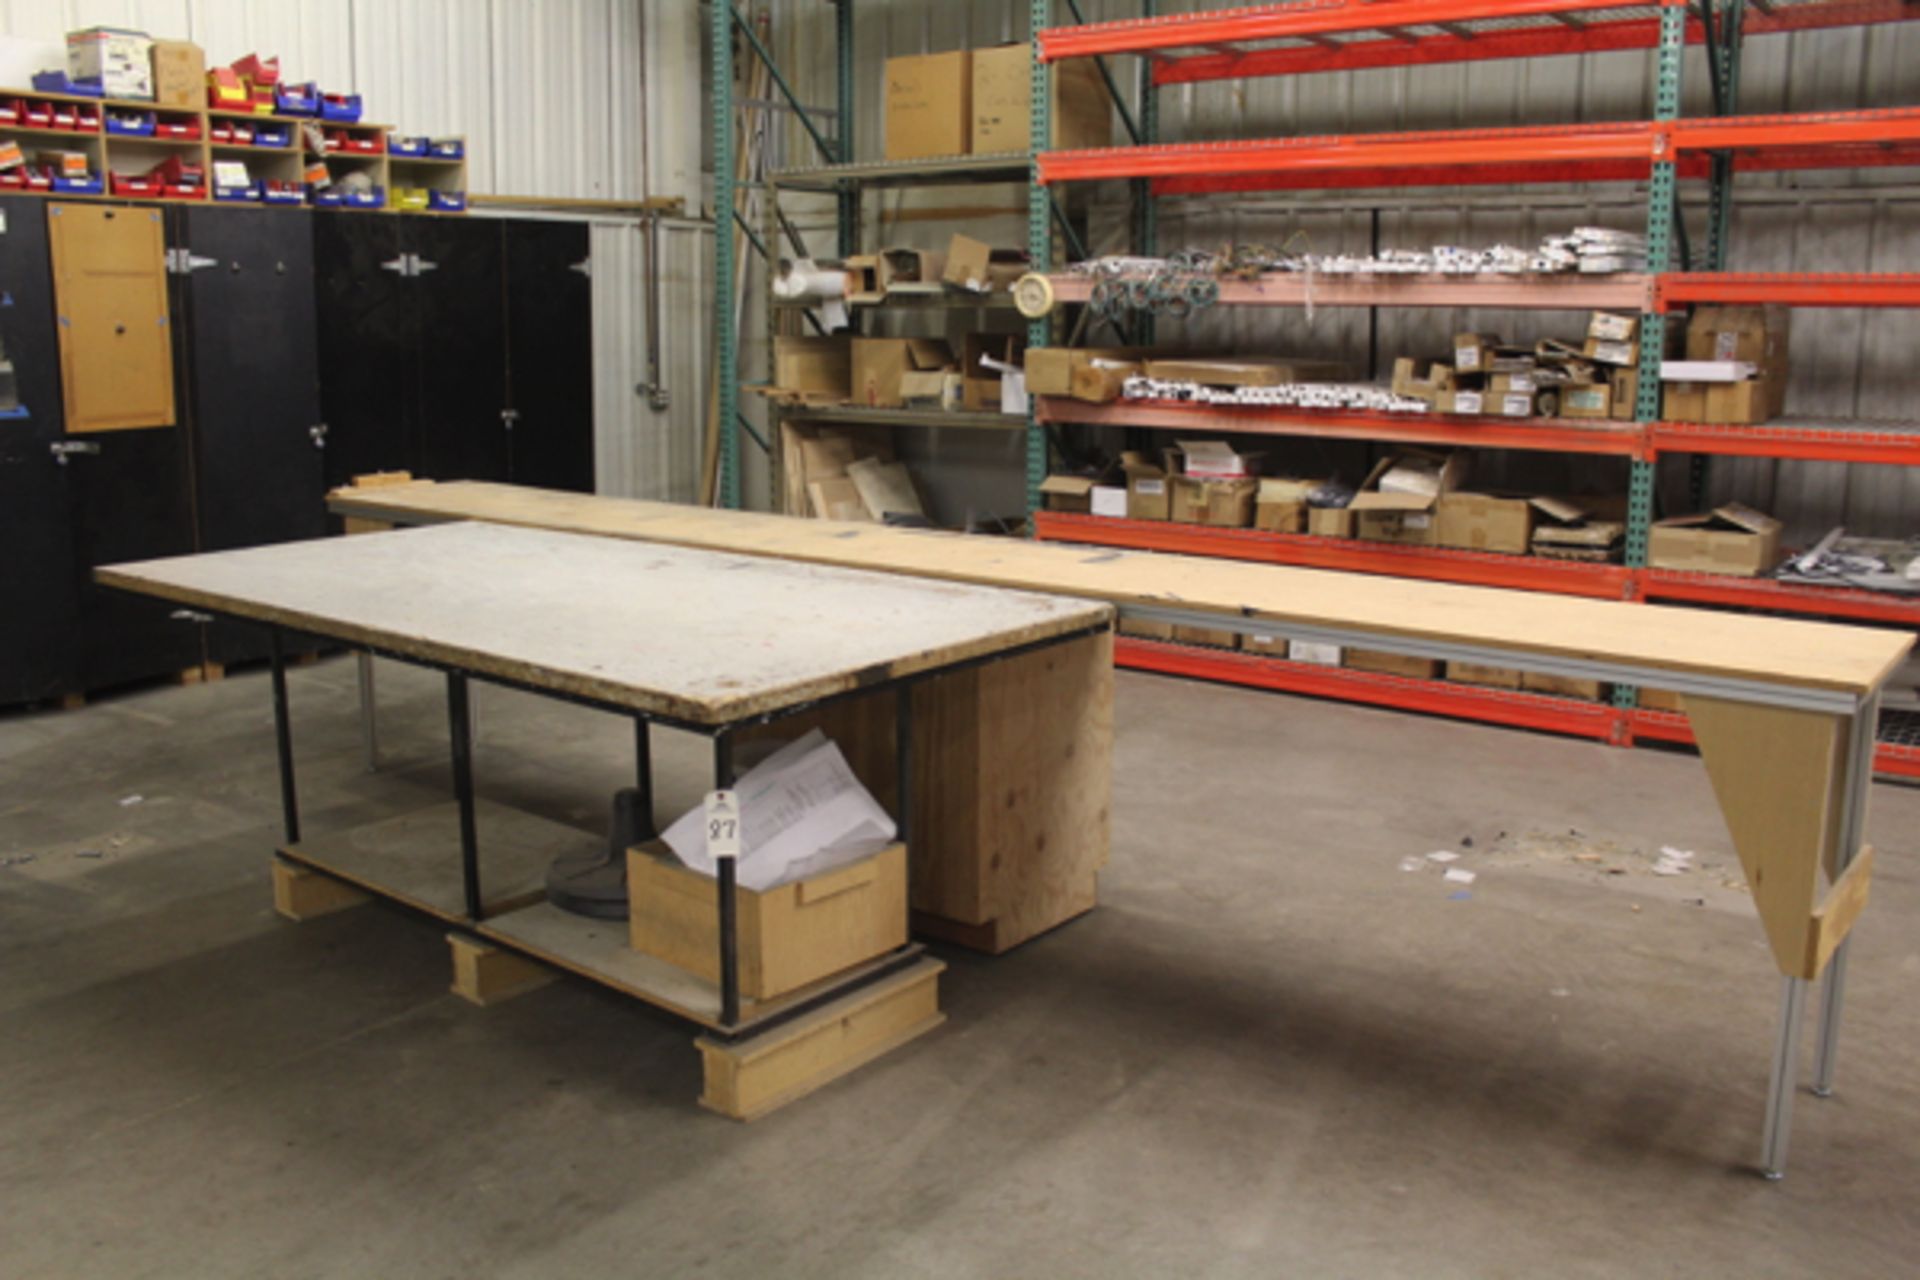 Lot of (2) Work Benches | Rigging Price: Hand Carry or Contact Rigger